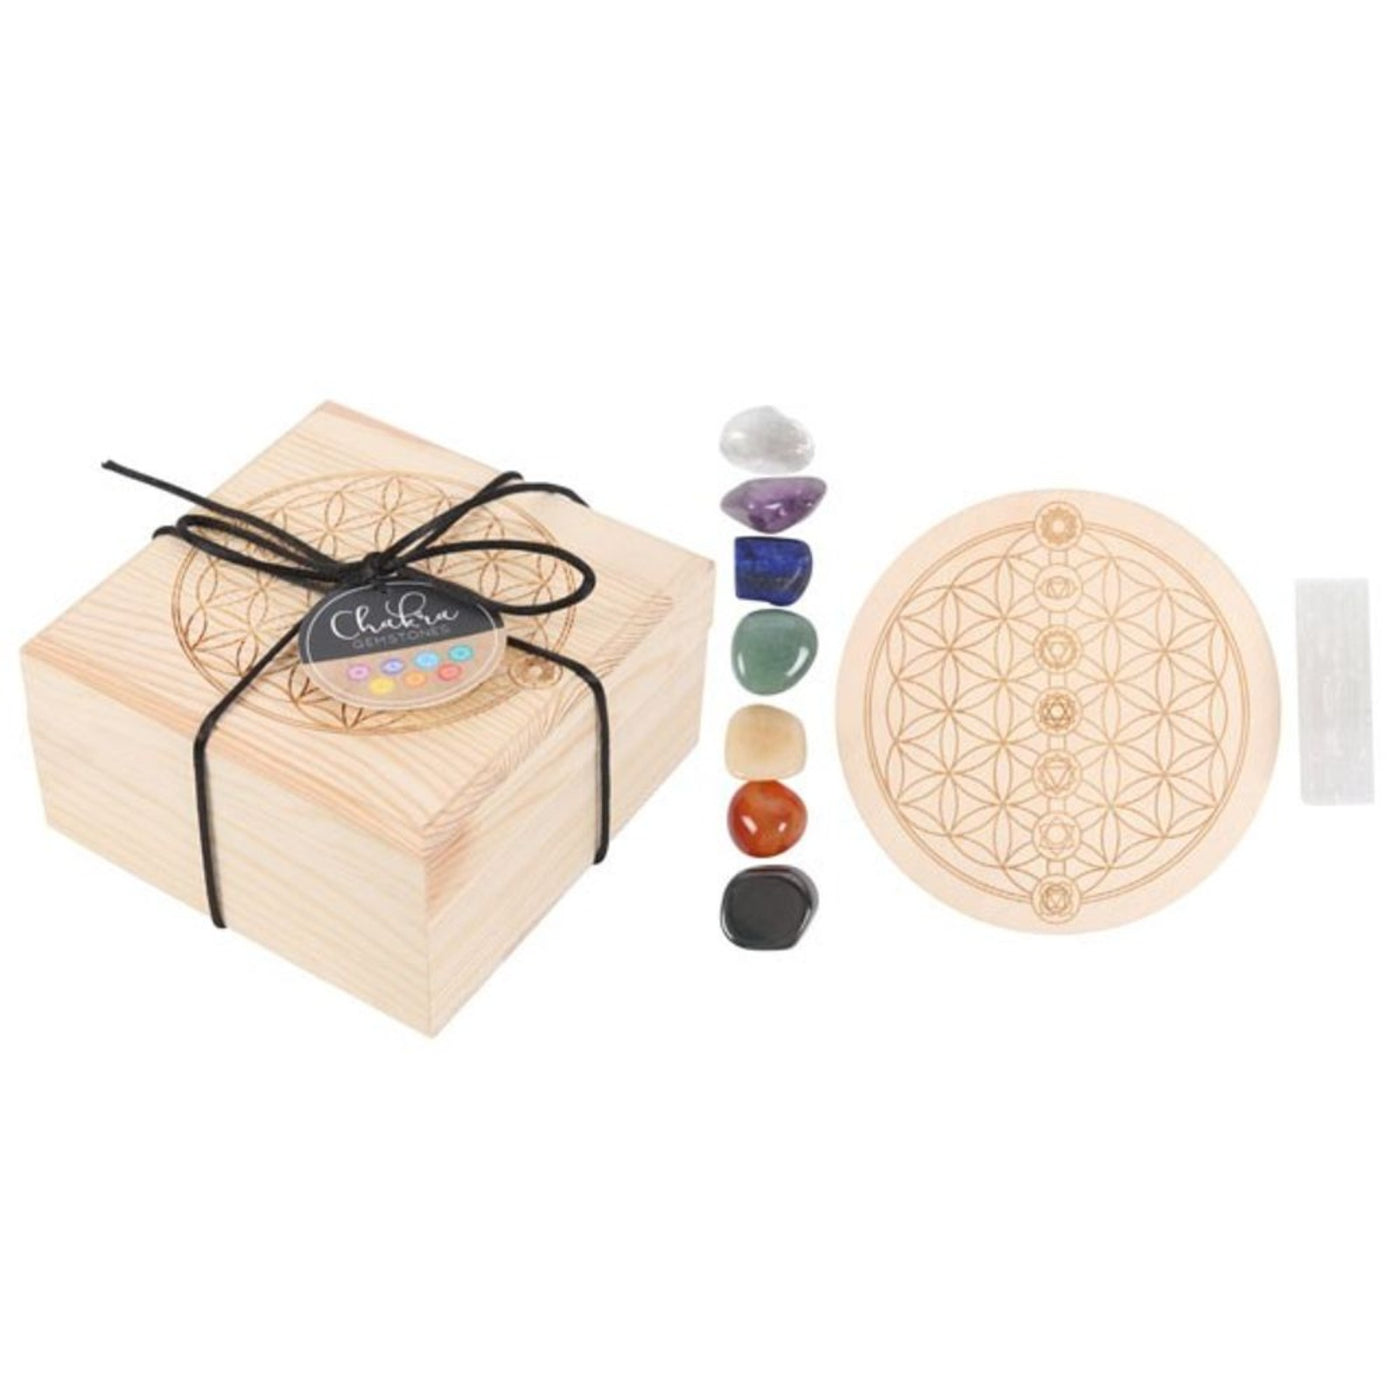 Chakra Crystal Grid With Seleinite Wand In Wooden Gift Box.